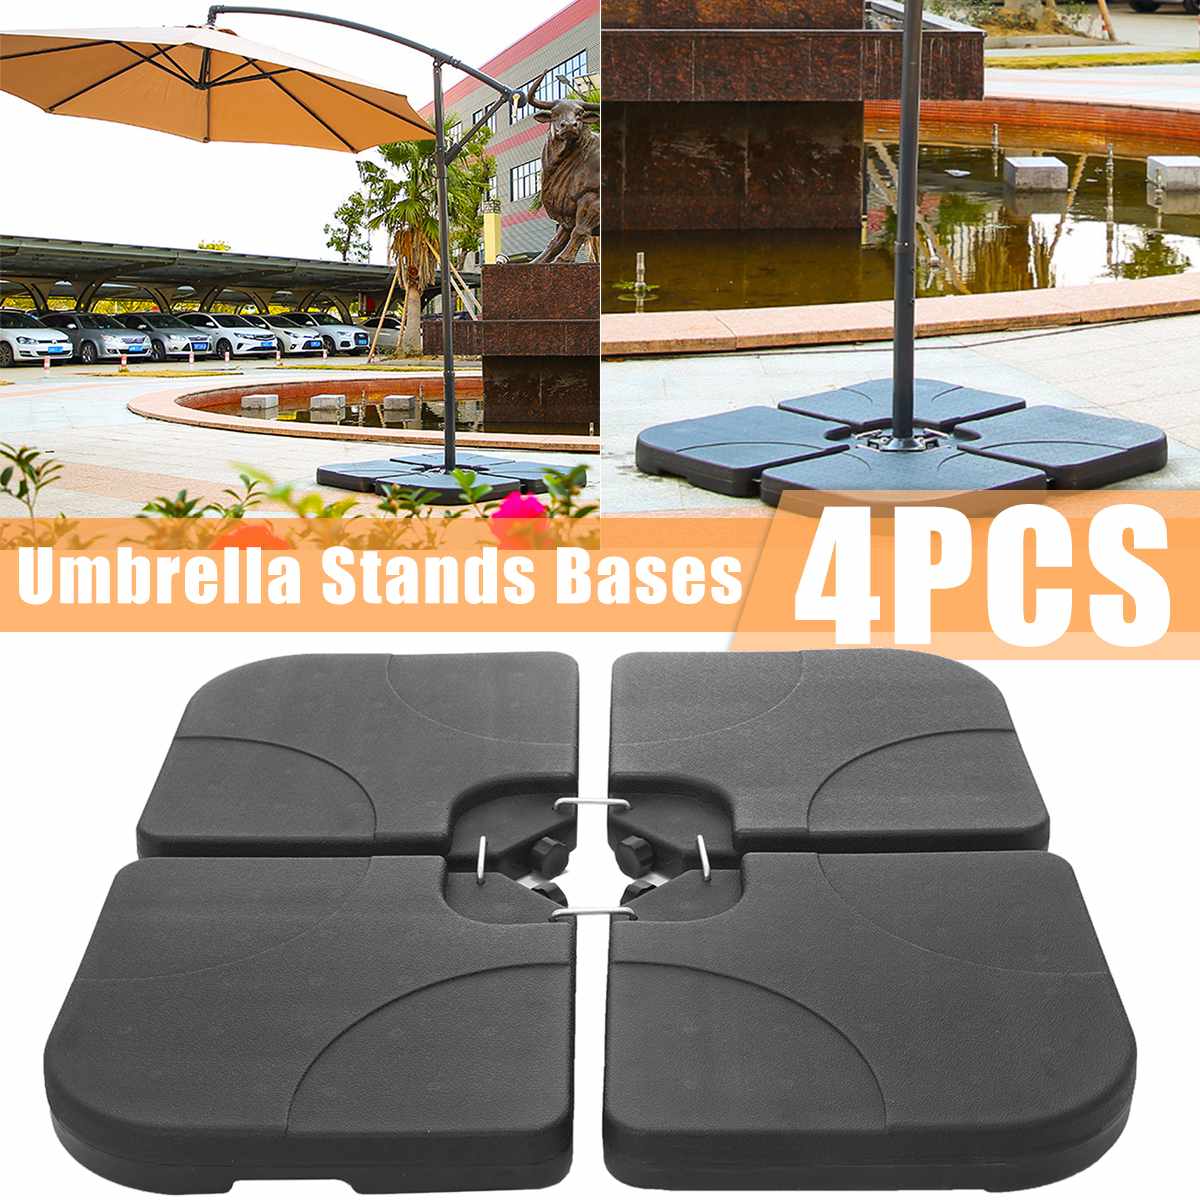 Umbrella Base Outdoor Parasol Stand Water Or Sand Filled Patio Umbrella Square Base For Garden Poolside